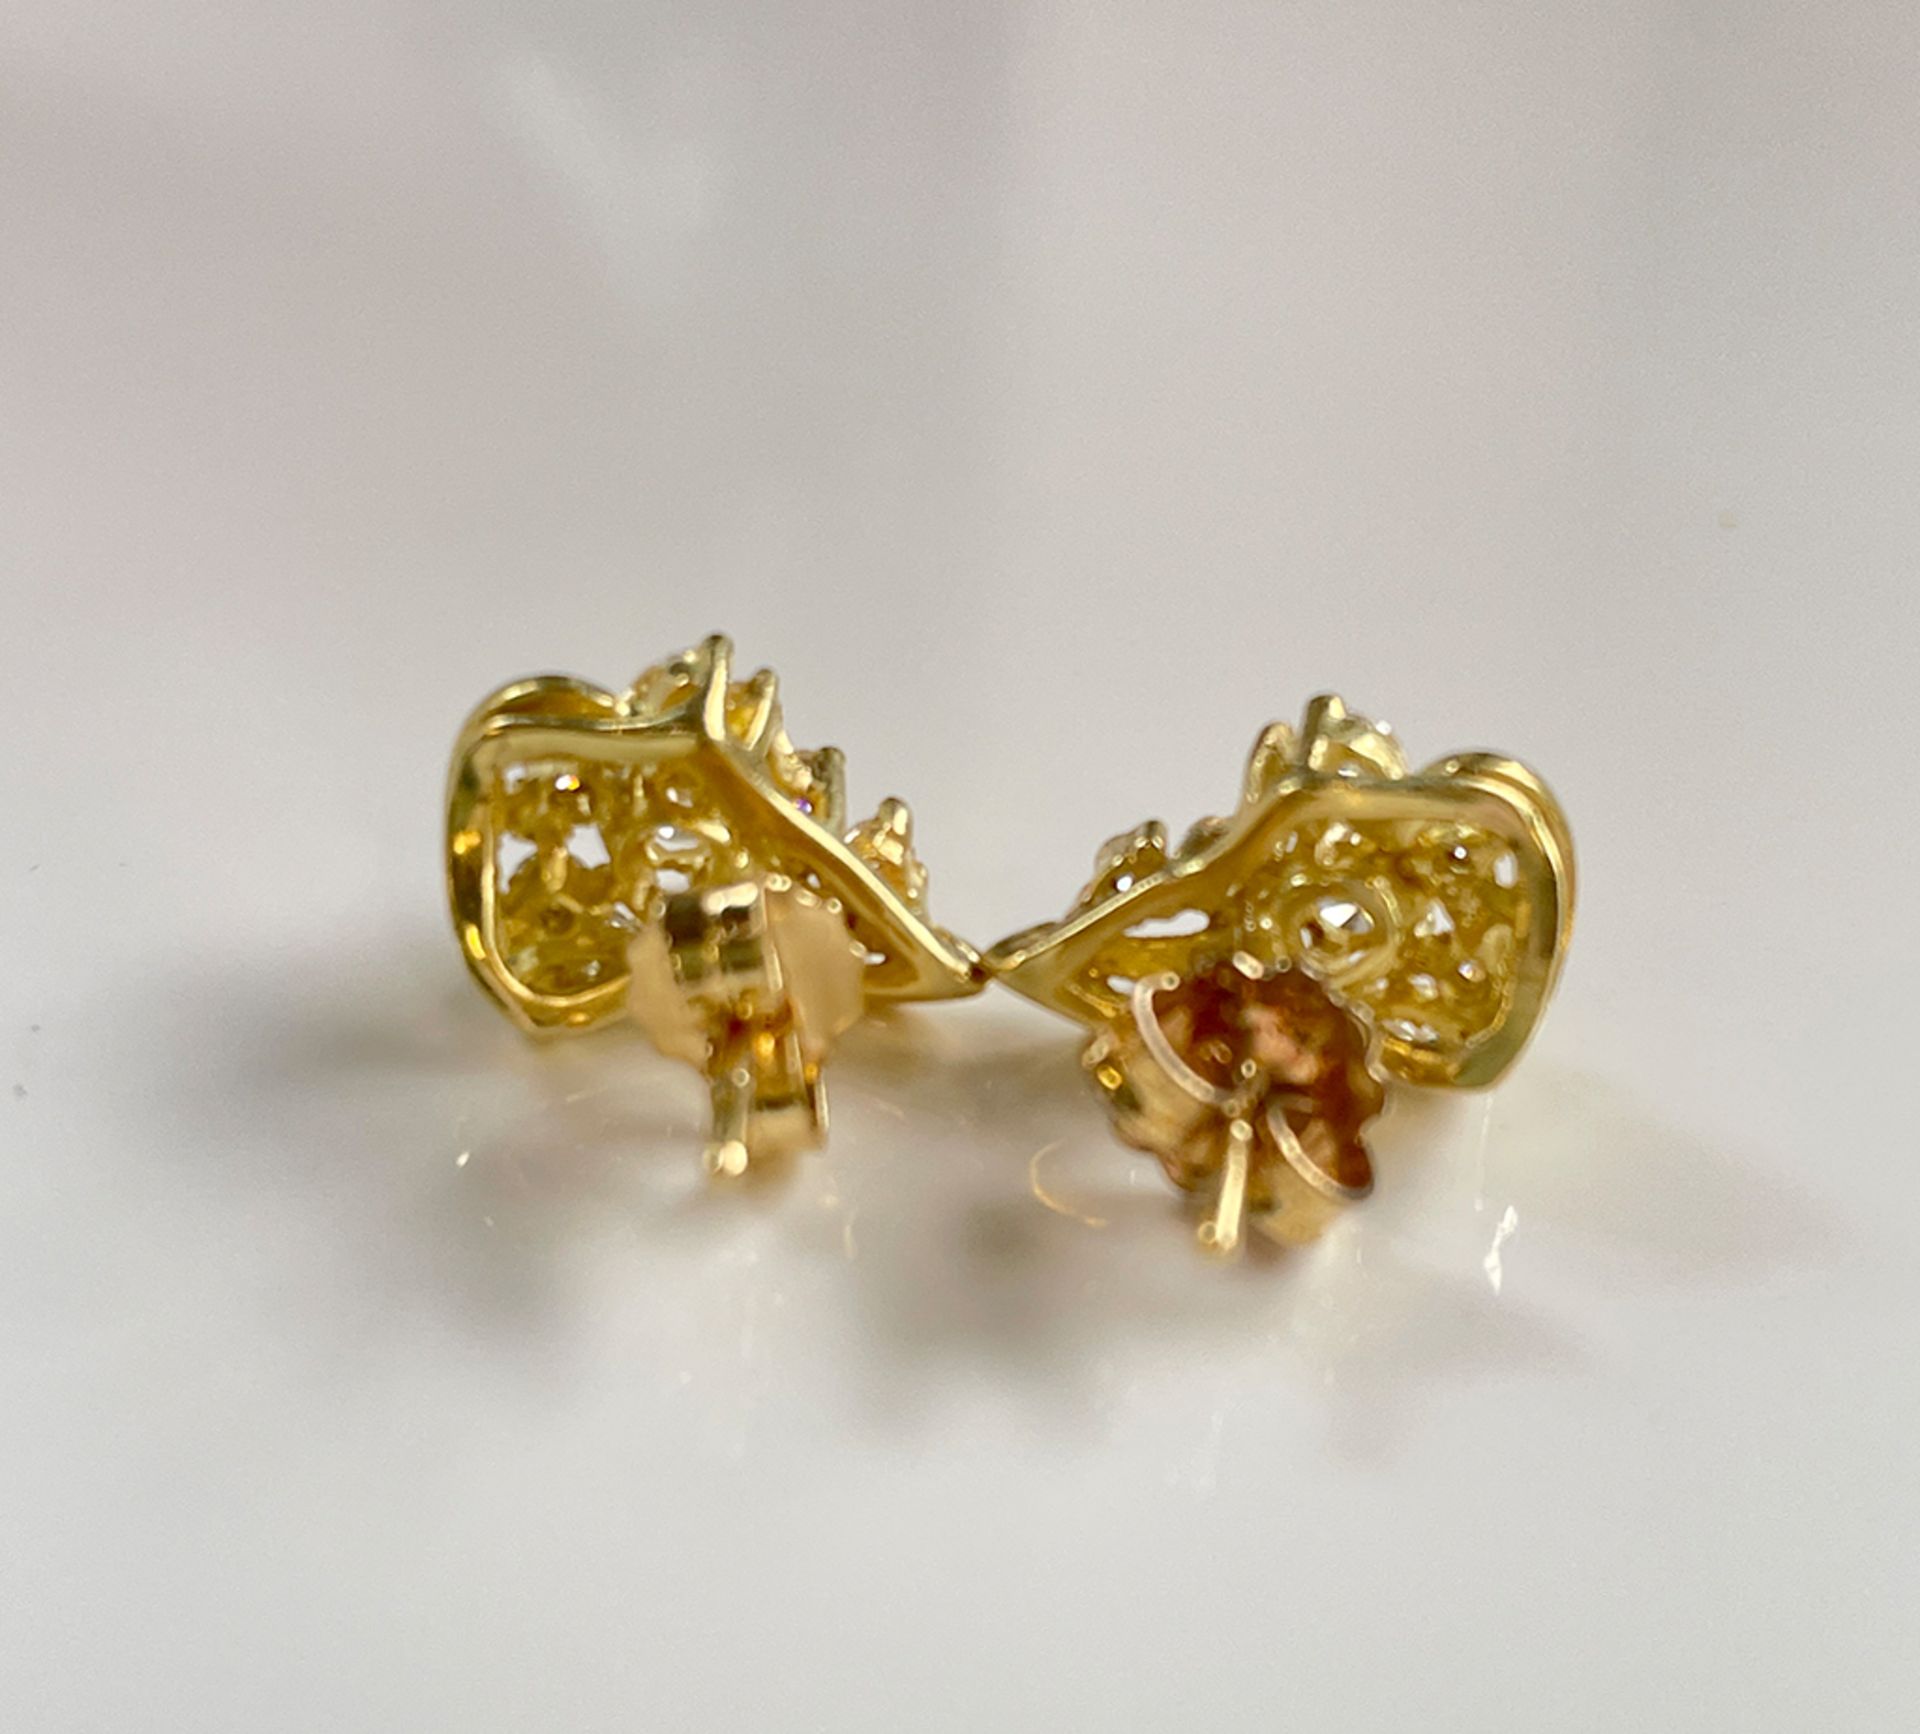 Earrings | Ear Studs 18K Gold with ca. 1ct diamonds / brilliants - Image 4 of 4